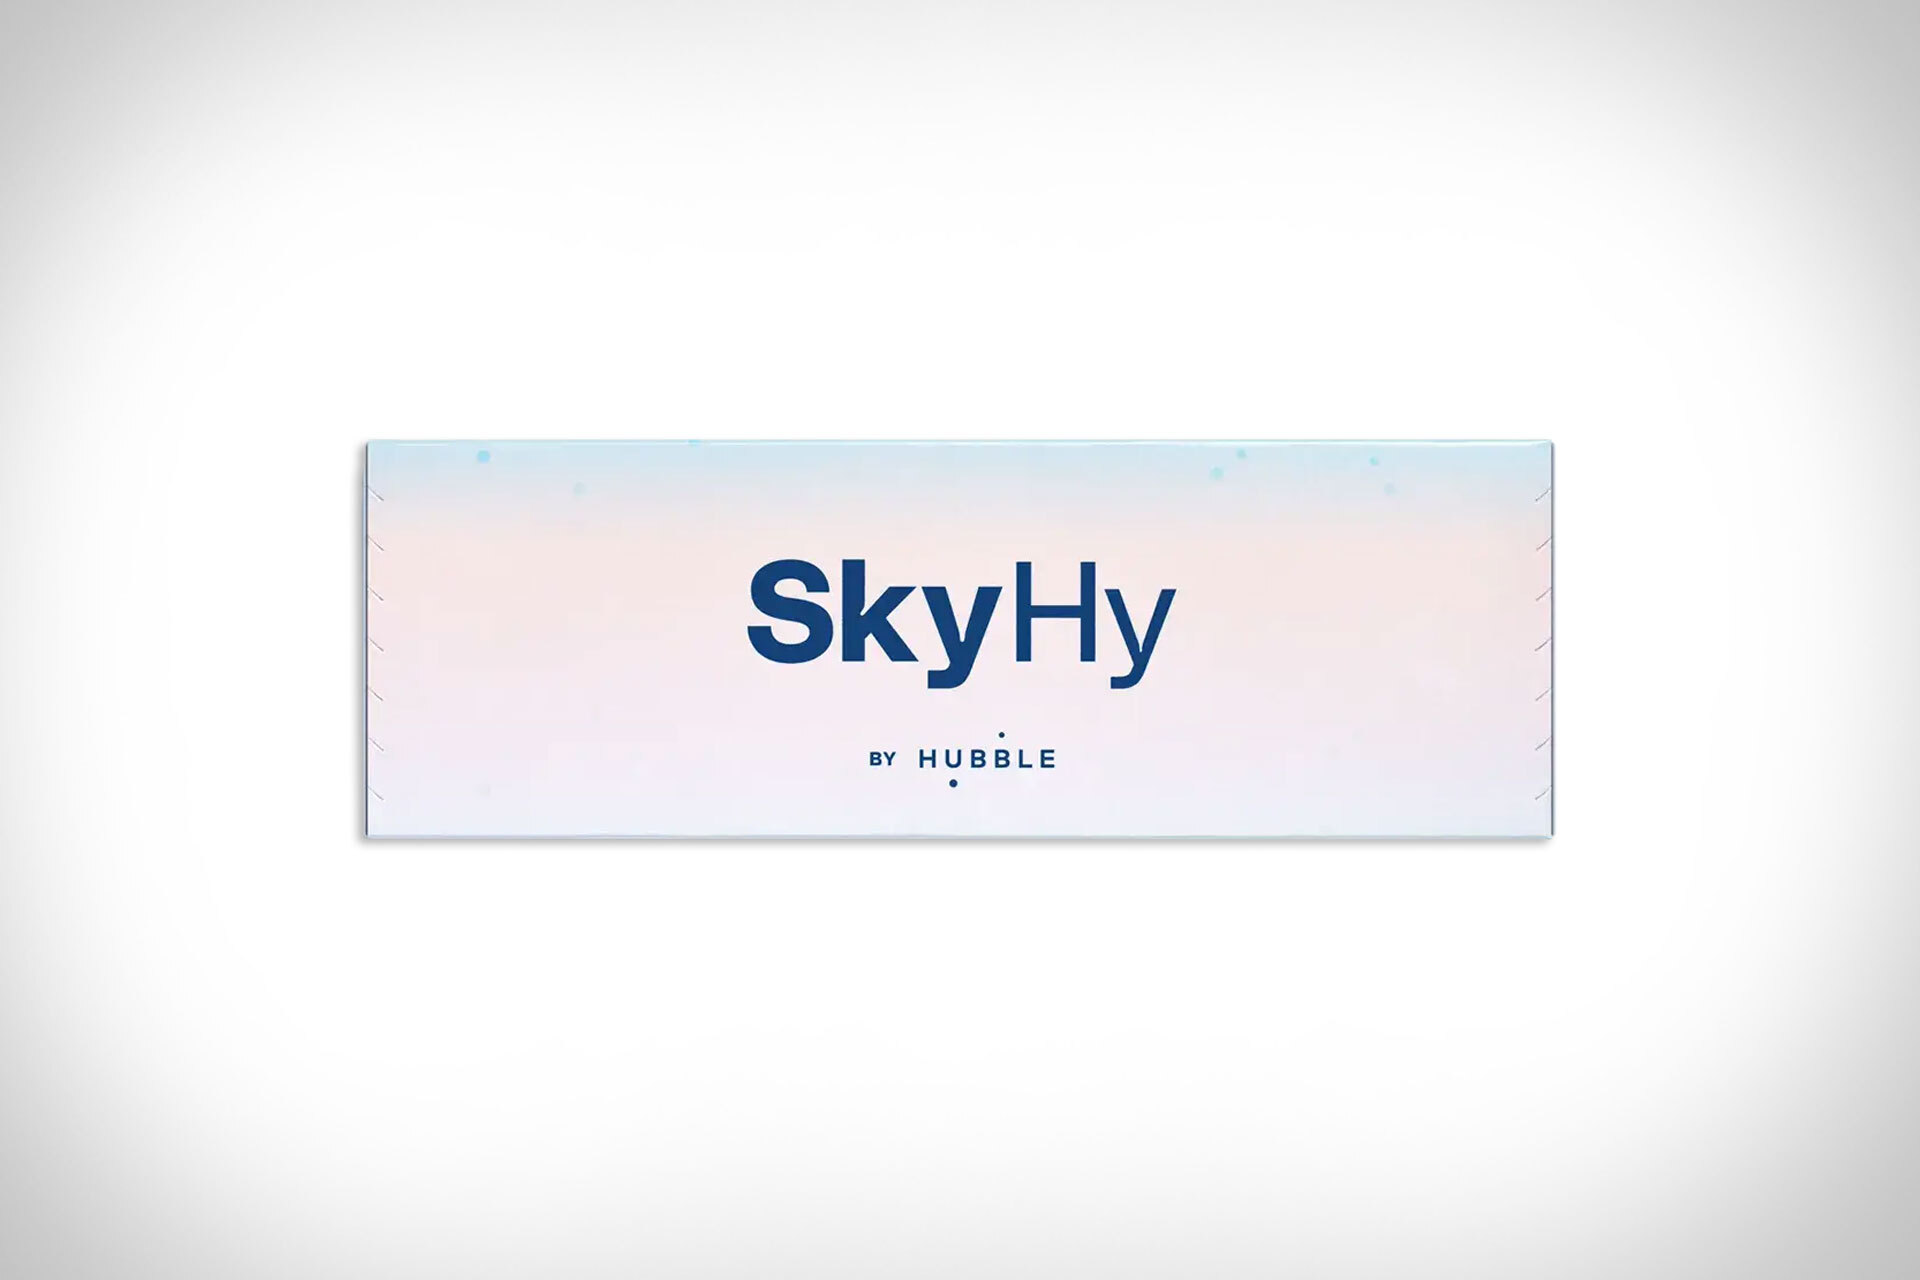 SkyHy by Hubble Contact Lenses, #SkyHy #Hubble #Contact #Lenses